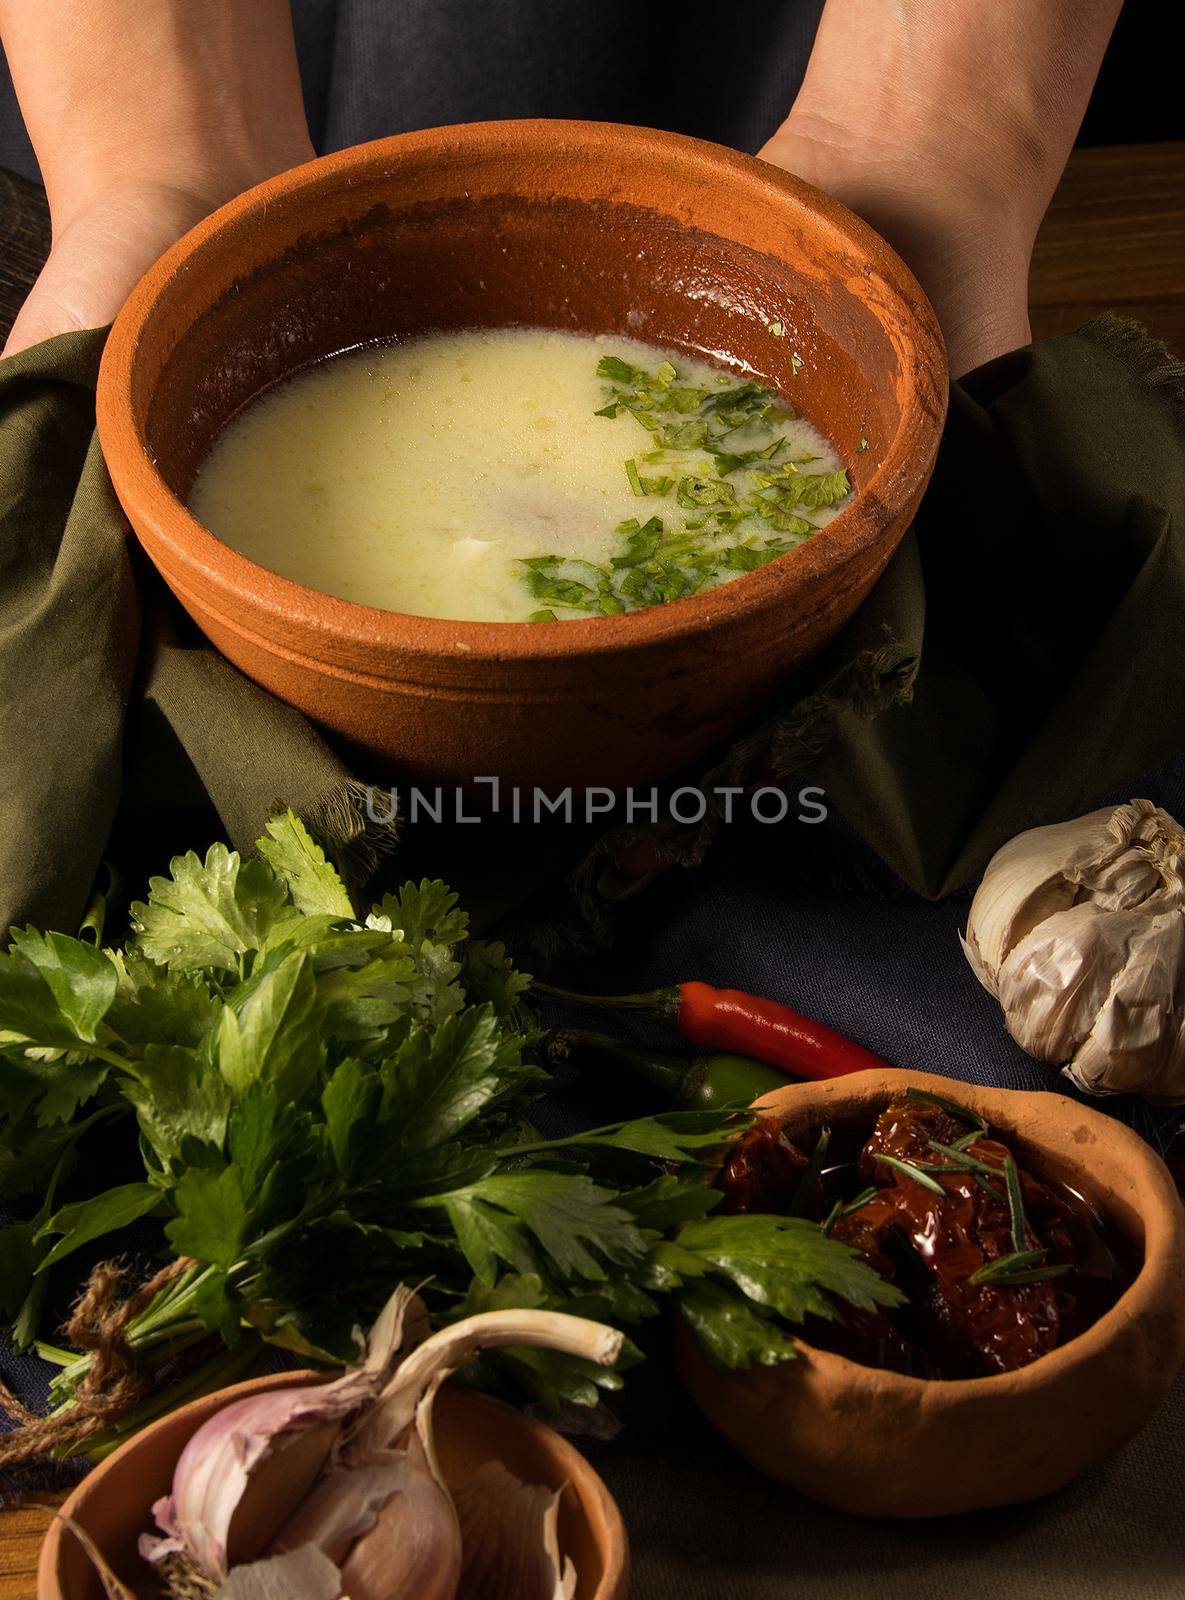 Shot of a dish in hands by A_Karim